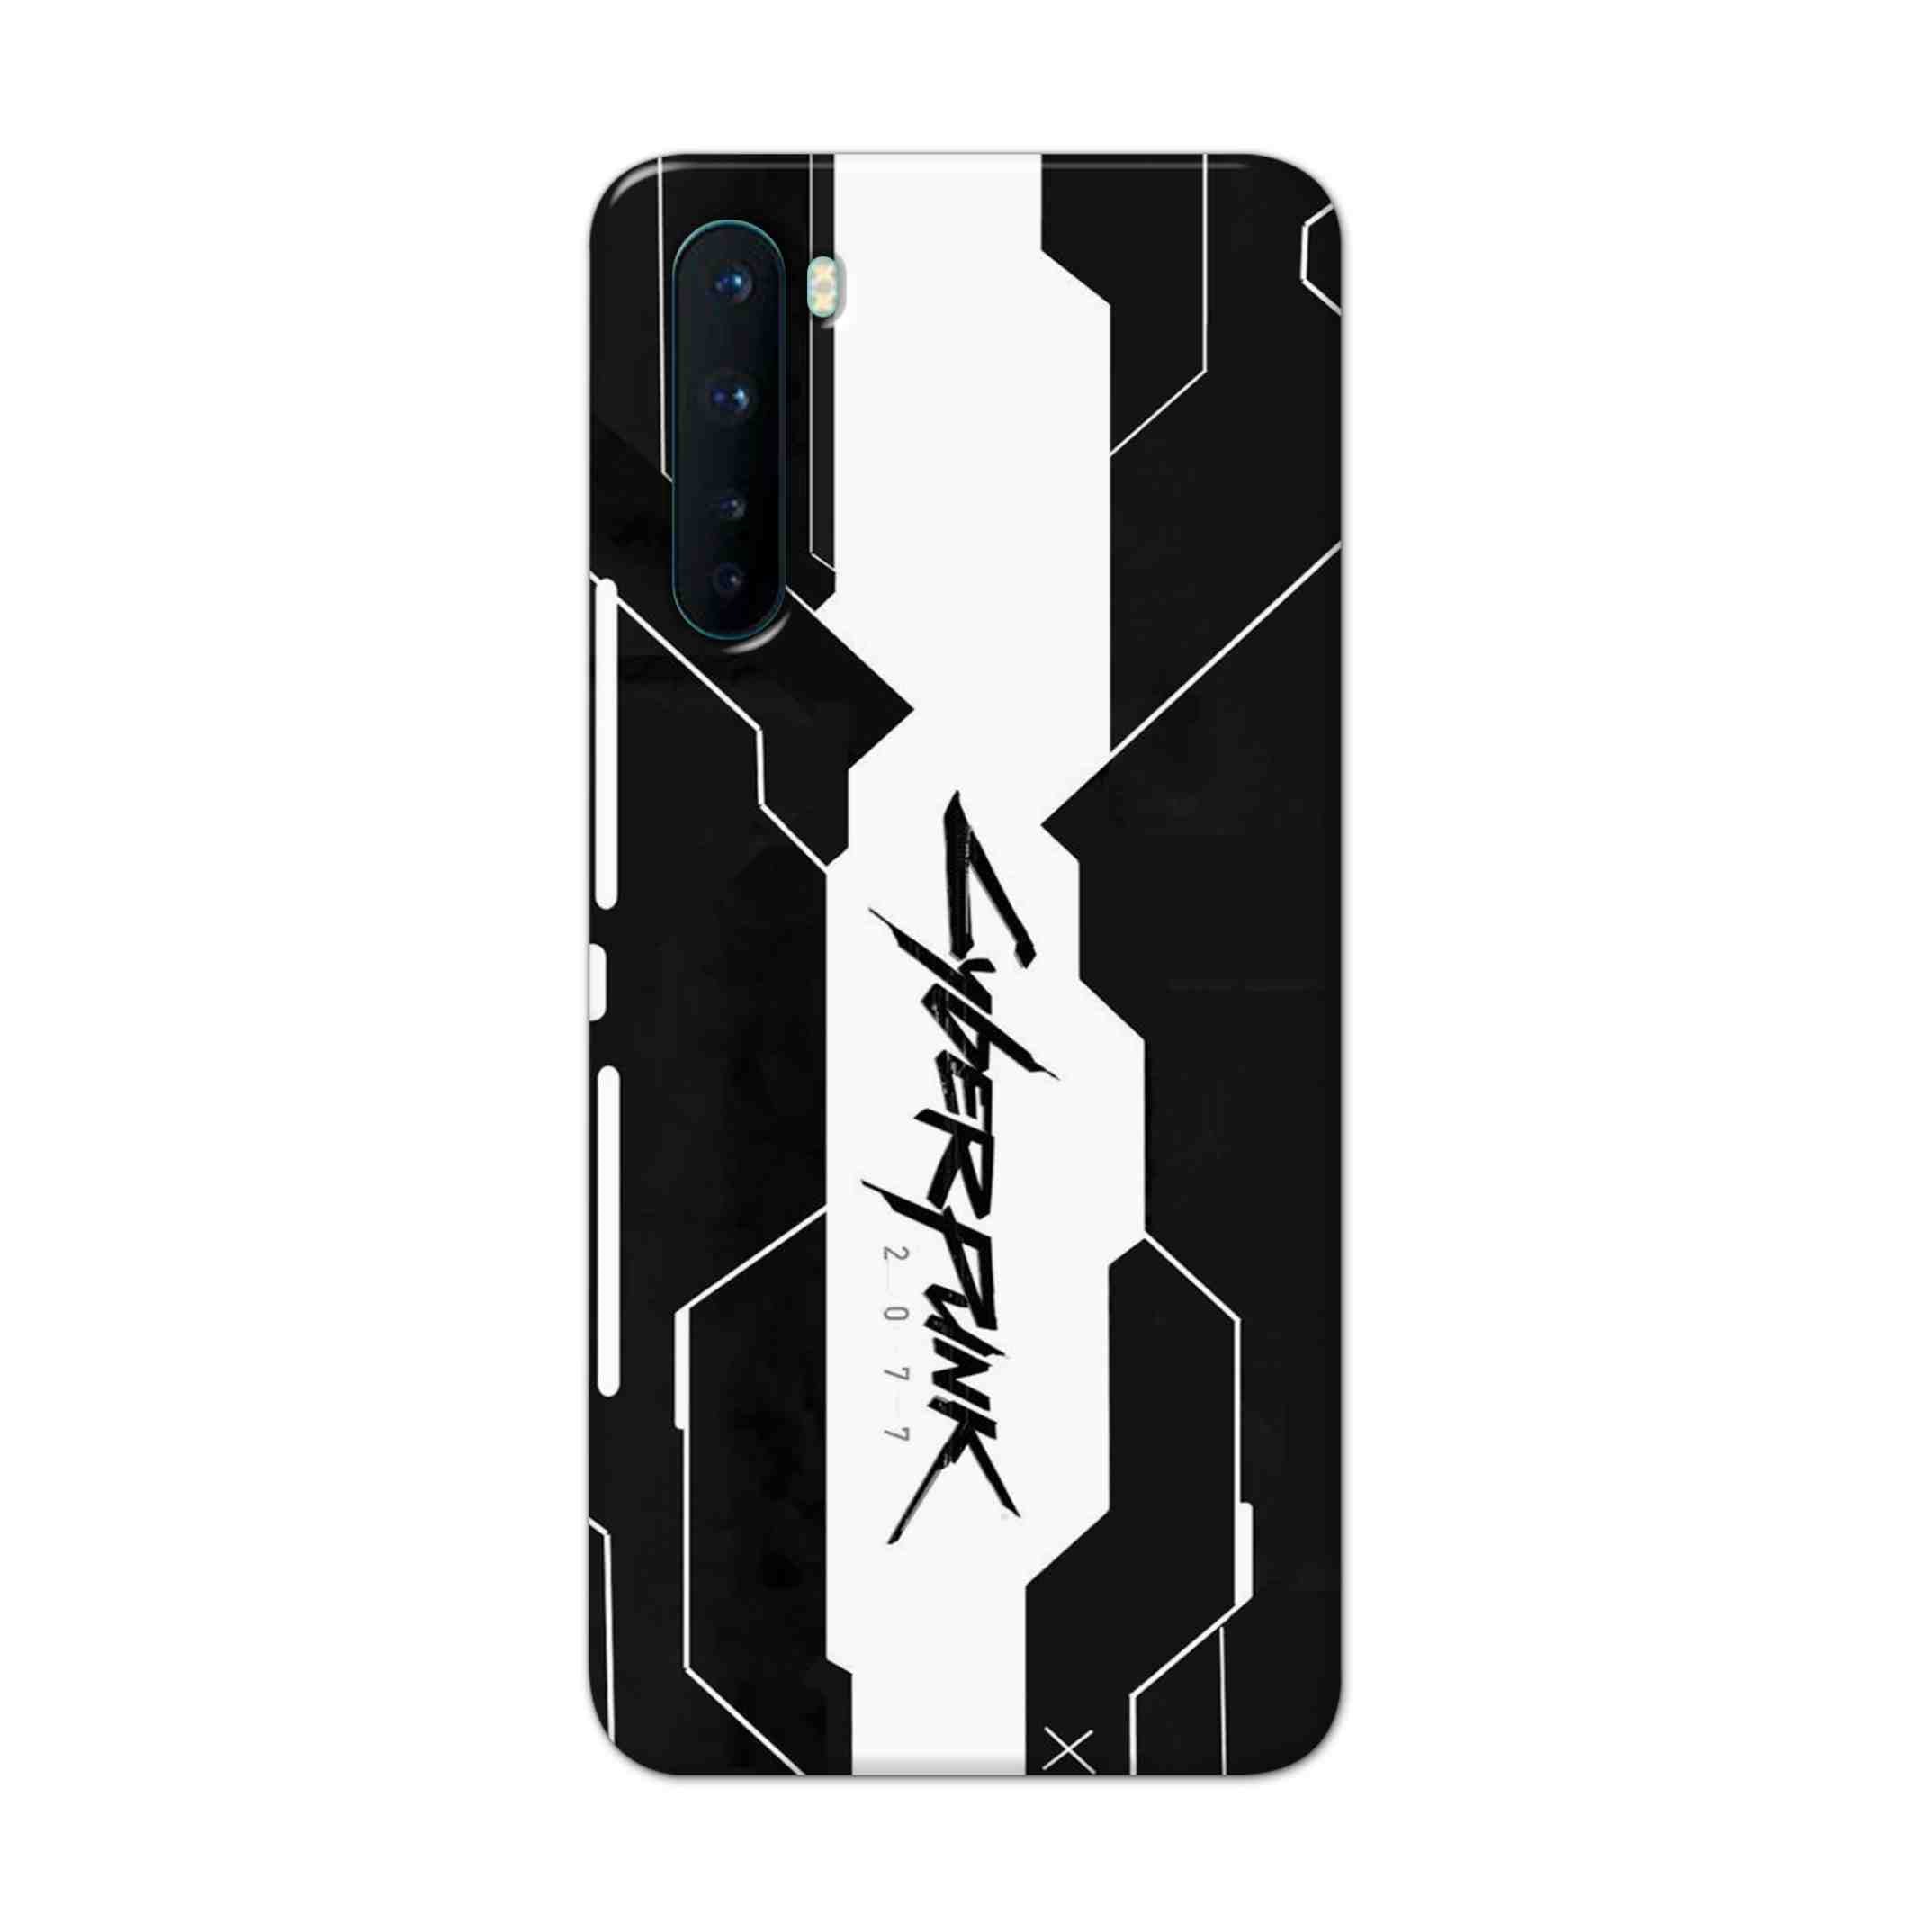 Buy Cyberpunk 2077 Art Hard Back Mobile Phone Case Cover For OnePlus Nord Online